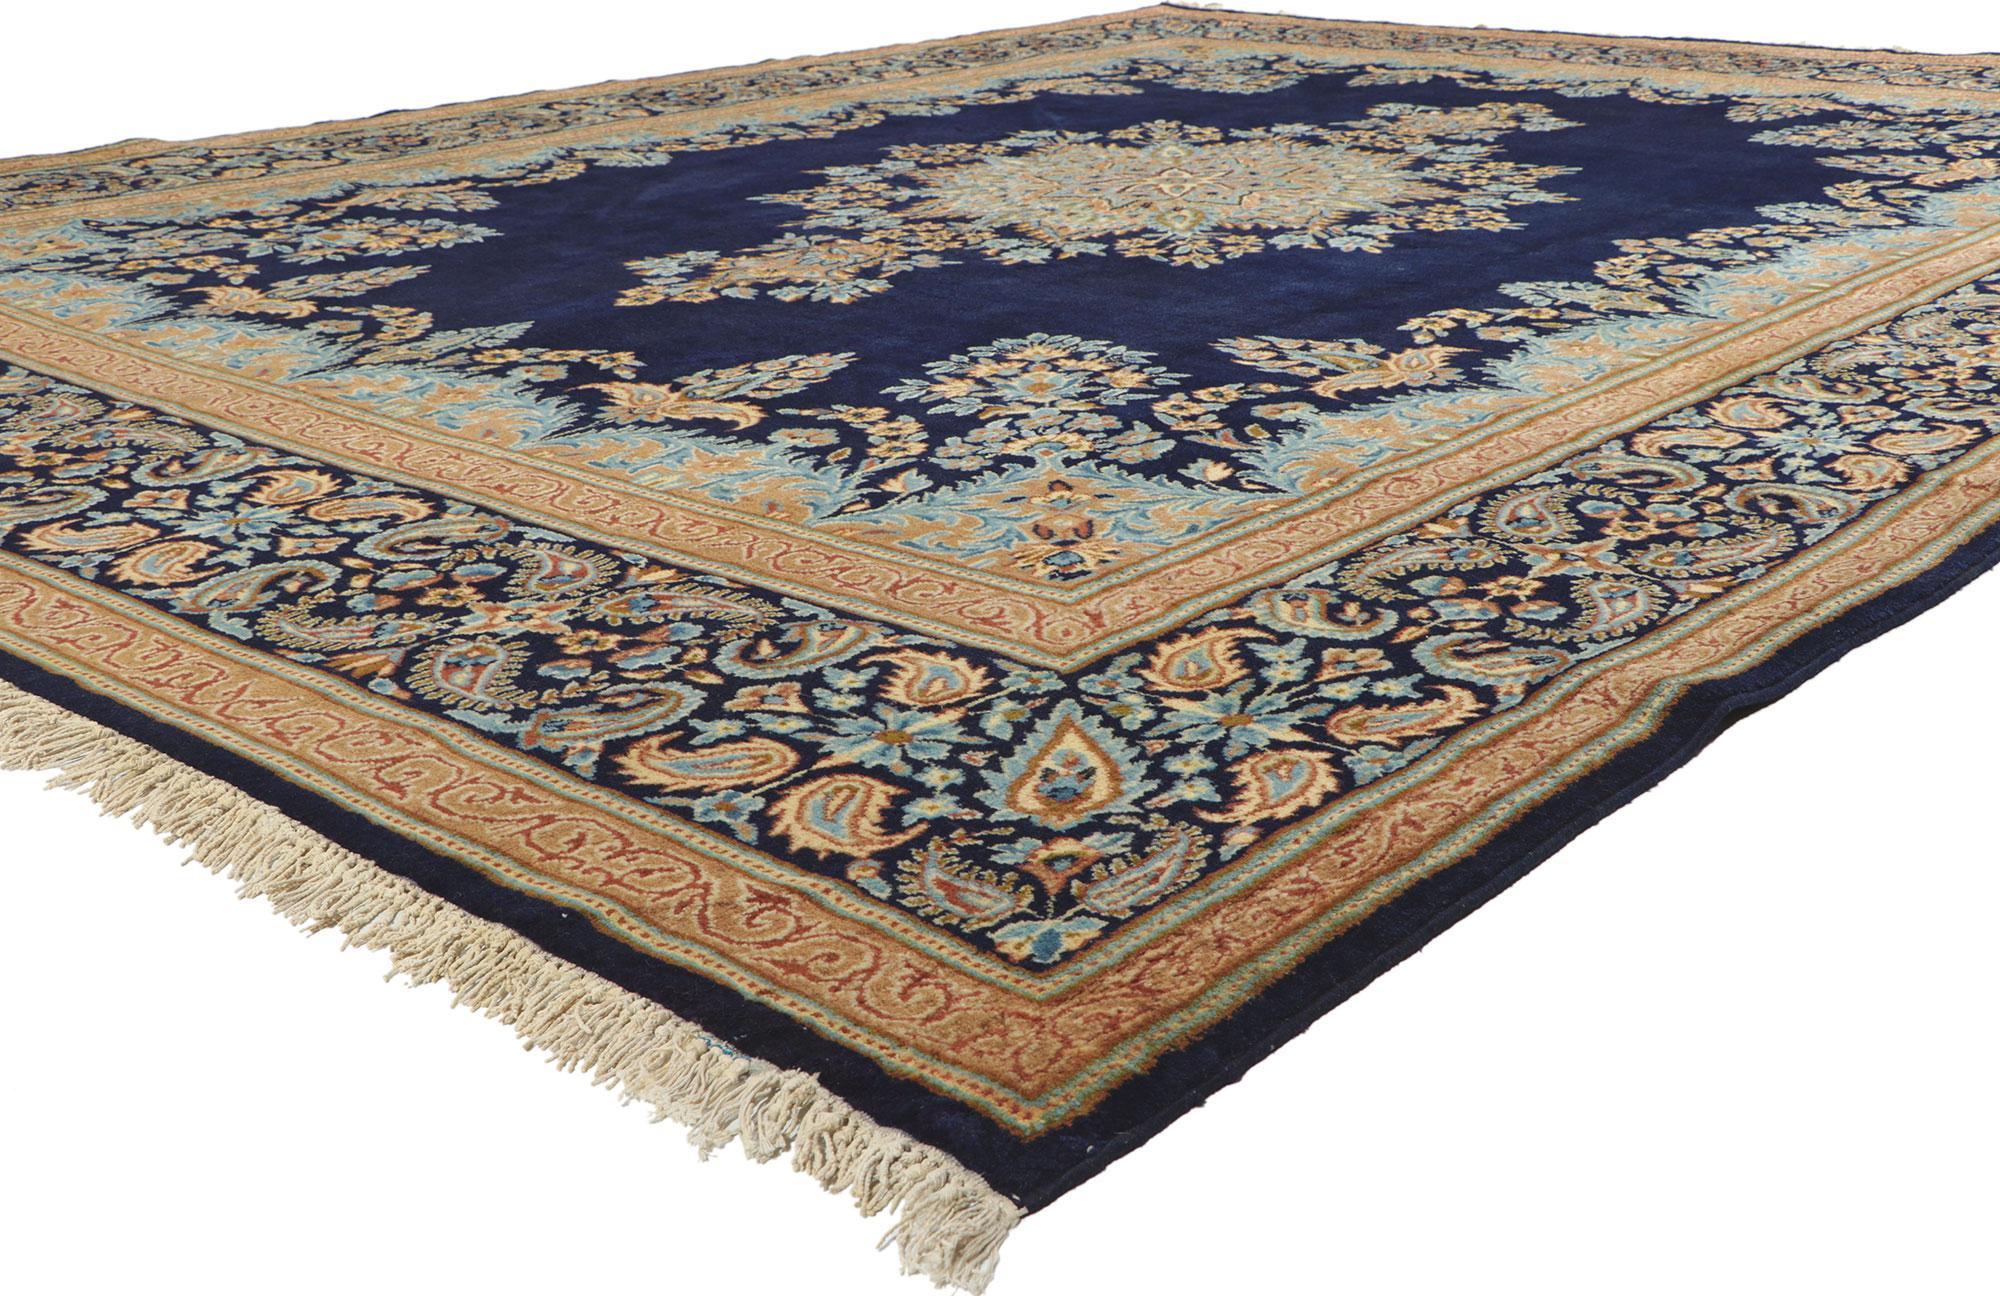 78528 Vintage Persian Kerman Rug, 10'03 x 13'05.
Displaying an impressive array of floral elements with incredible detail and texture, this hand knotted vintage Persian Kerman rug is a captivating vision of woven beauty. The timeless design and